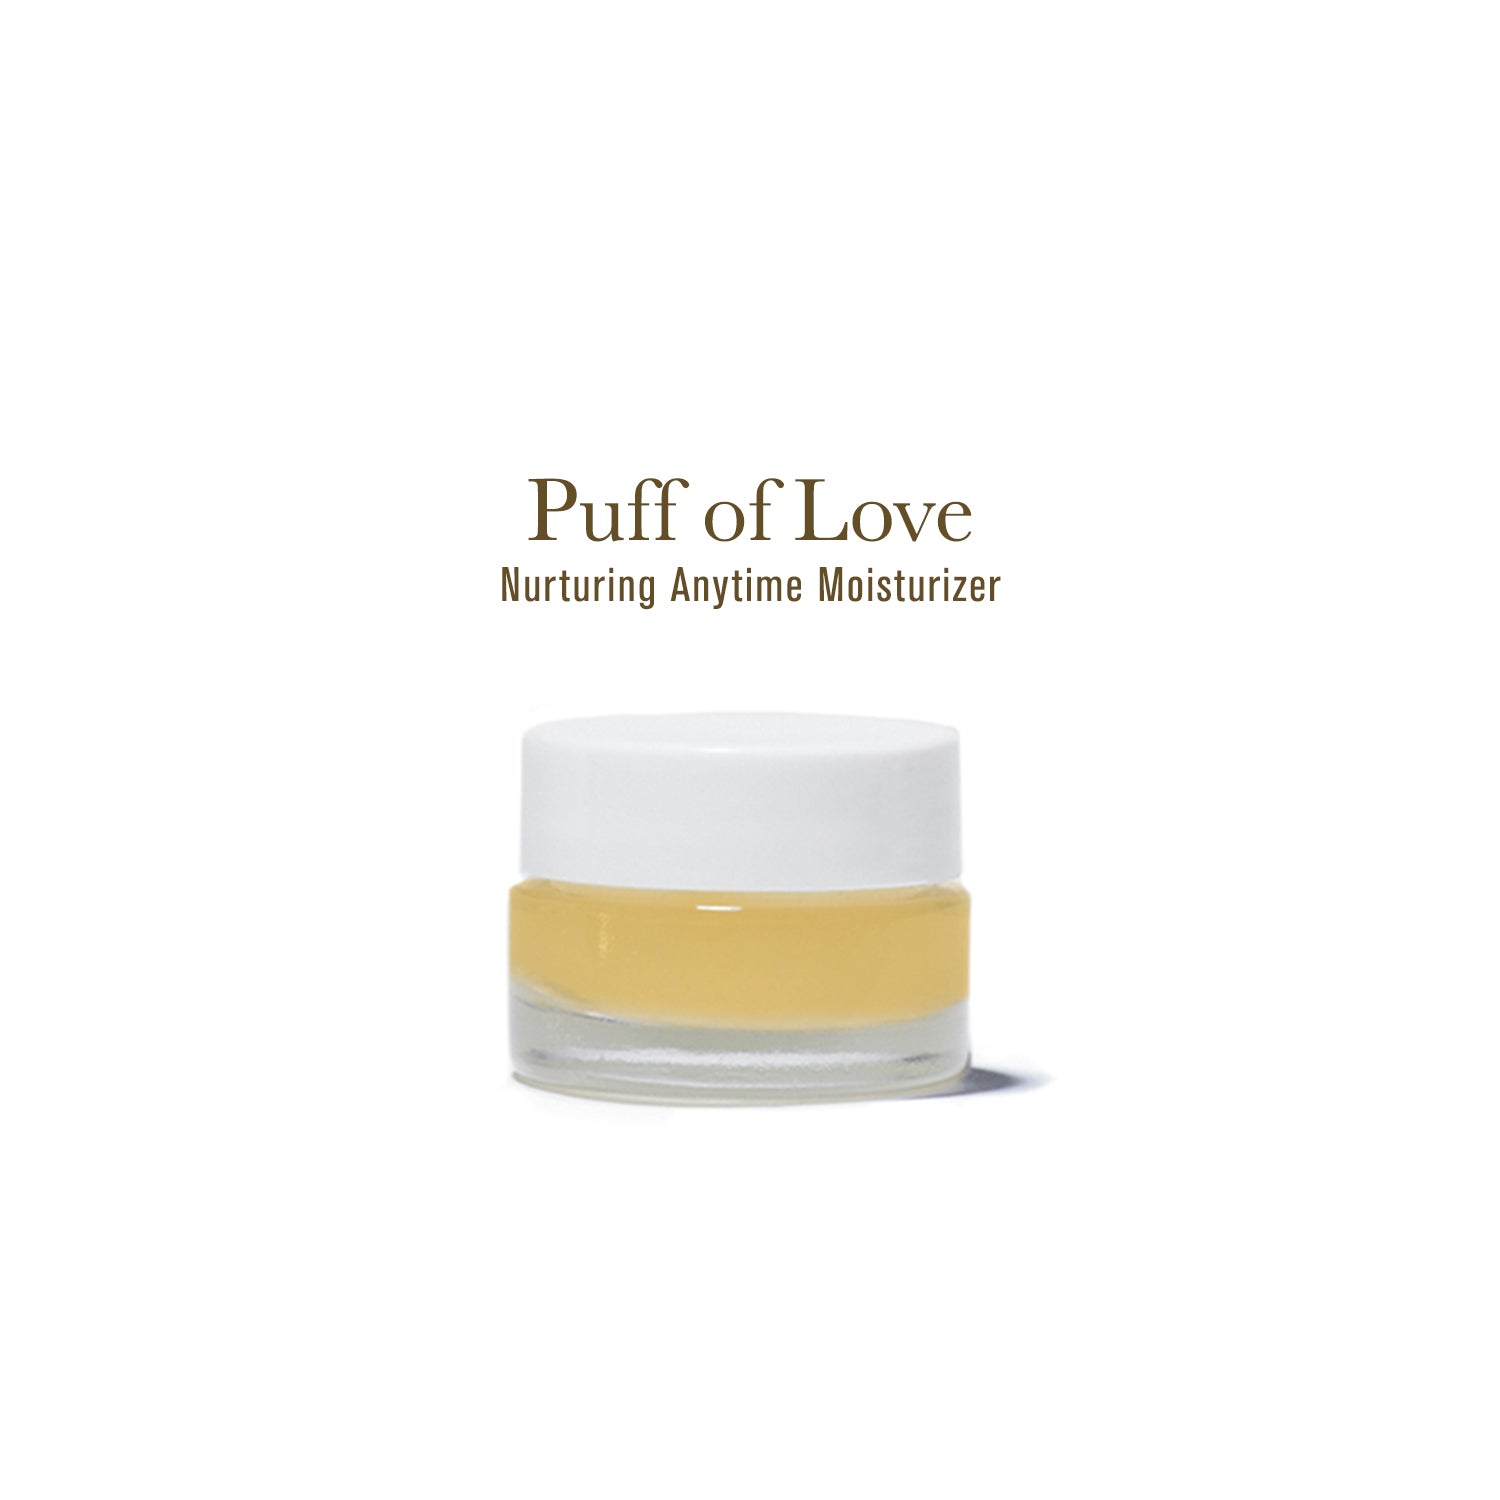 Puff of Love Moisturizer, in clear glass jar with white lid, on white background.